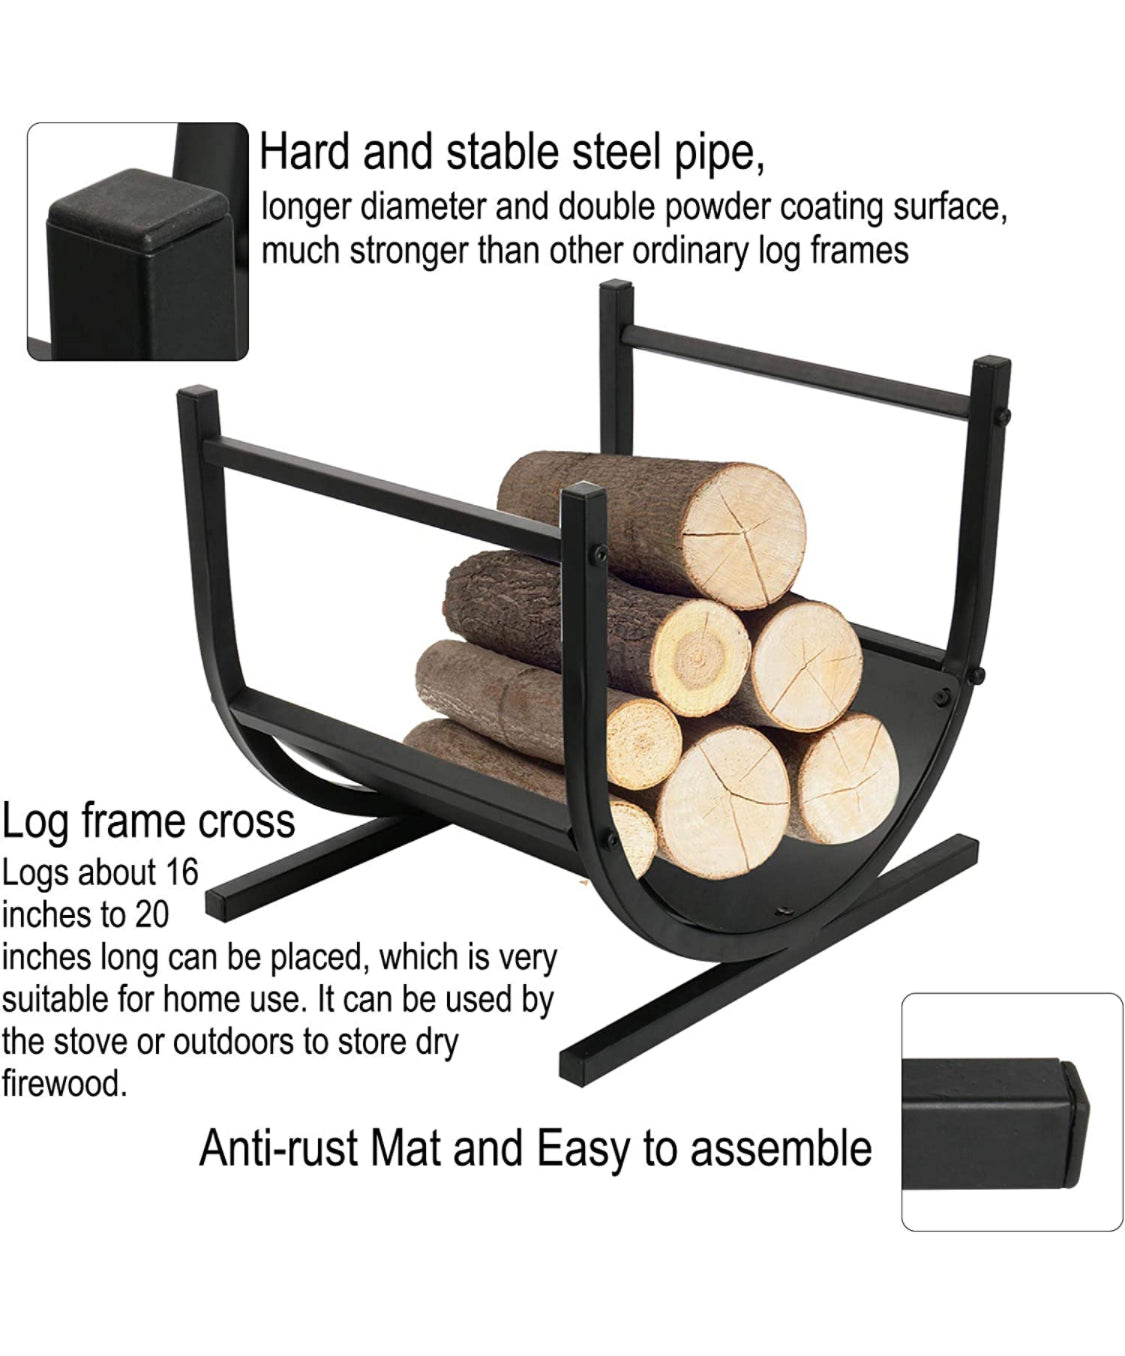 Fireplace Log Holder Firewood Rack 17 Inch Heavy Duty Small Cast Iron Firewood Log Rack Bin for Patio Deck Fireplace Indoor/Outdoor with Scrolls for Log Wood Lumber Kindling Black